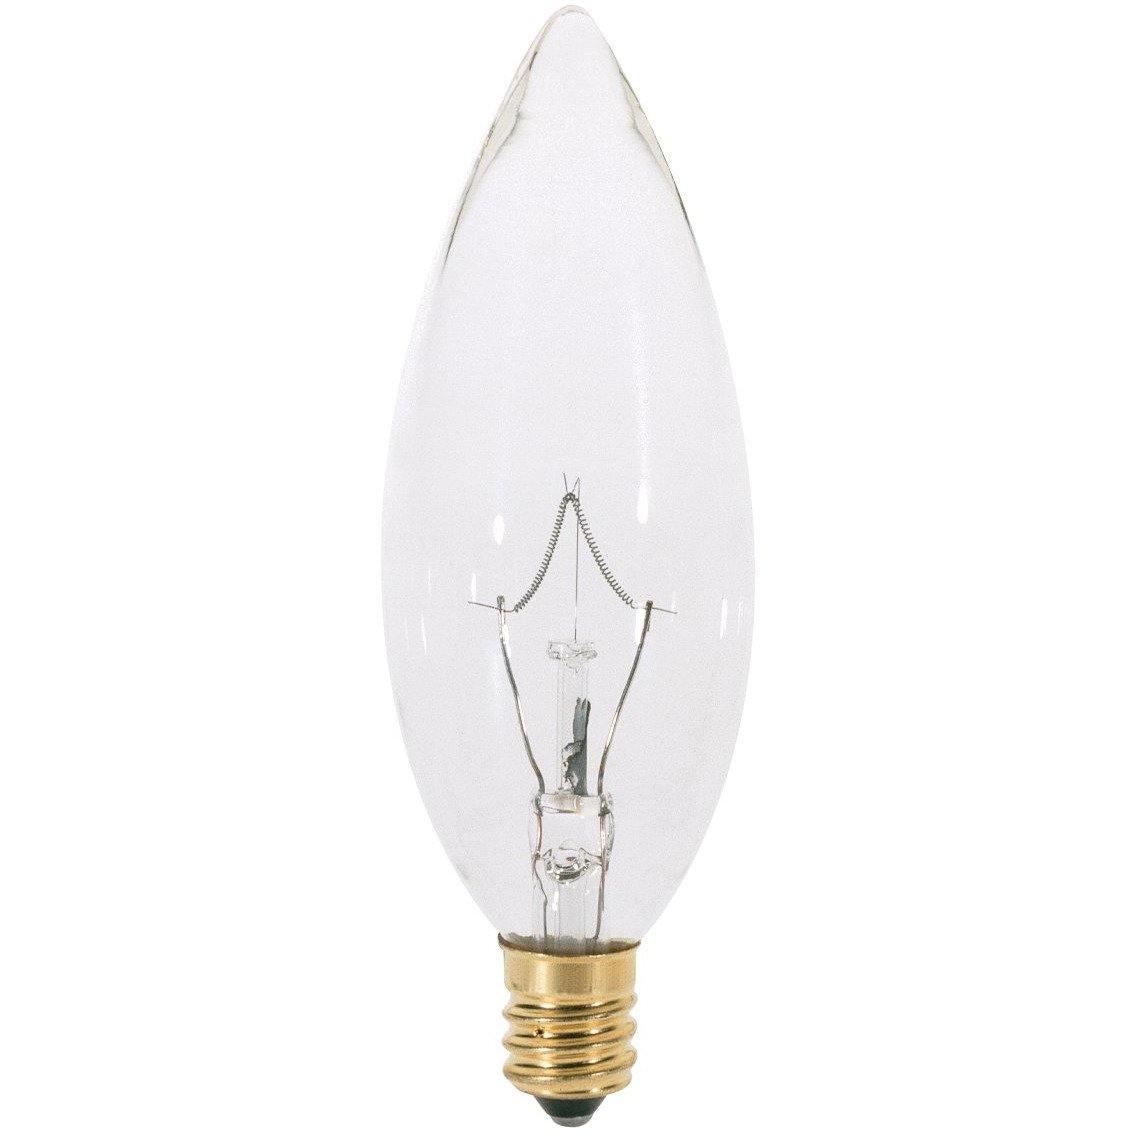 Satco Products - 25 Watt BA9 1/2 Incandescent, Clear, 2500 Average rated hours, 193 Lumens, Candelabra base, 130 Volt - A3682 | Montreal Lighting & Hardware